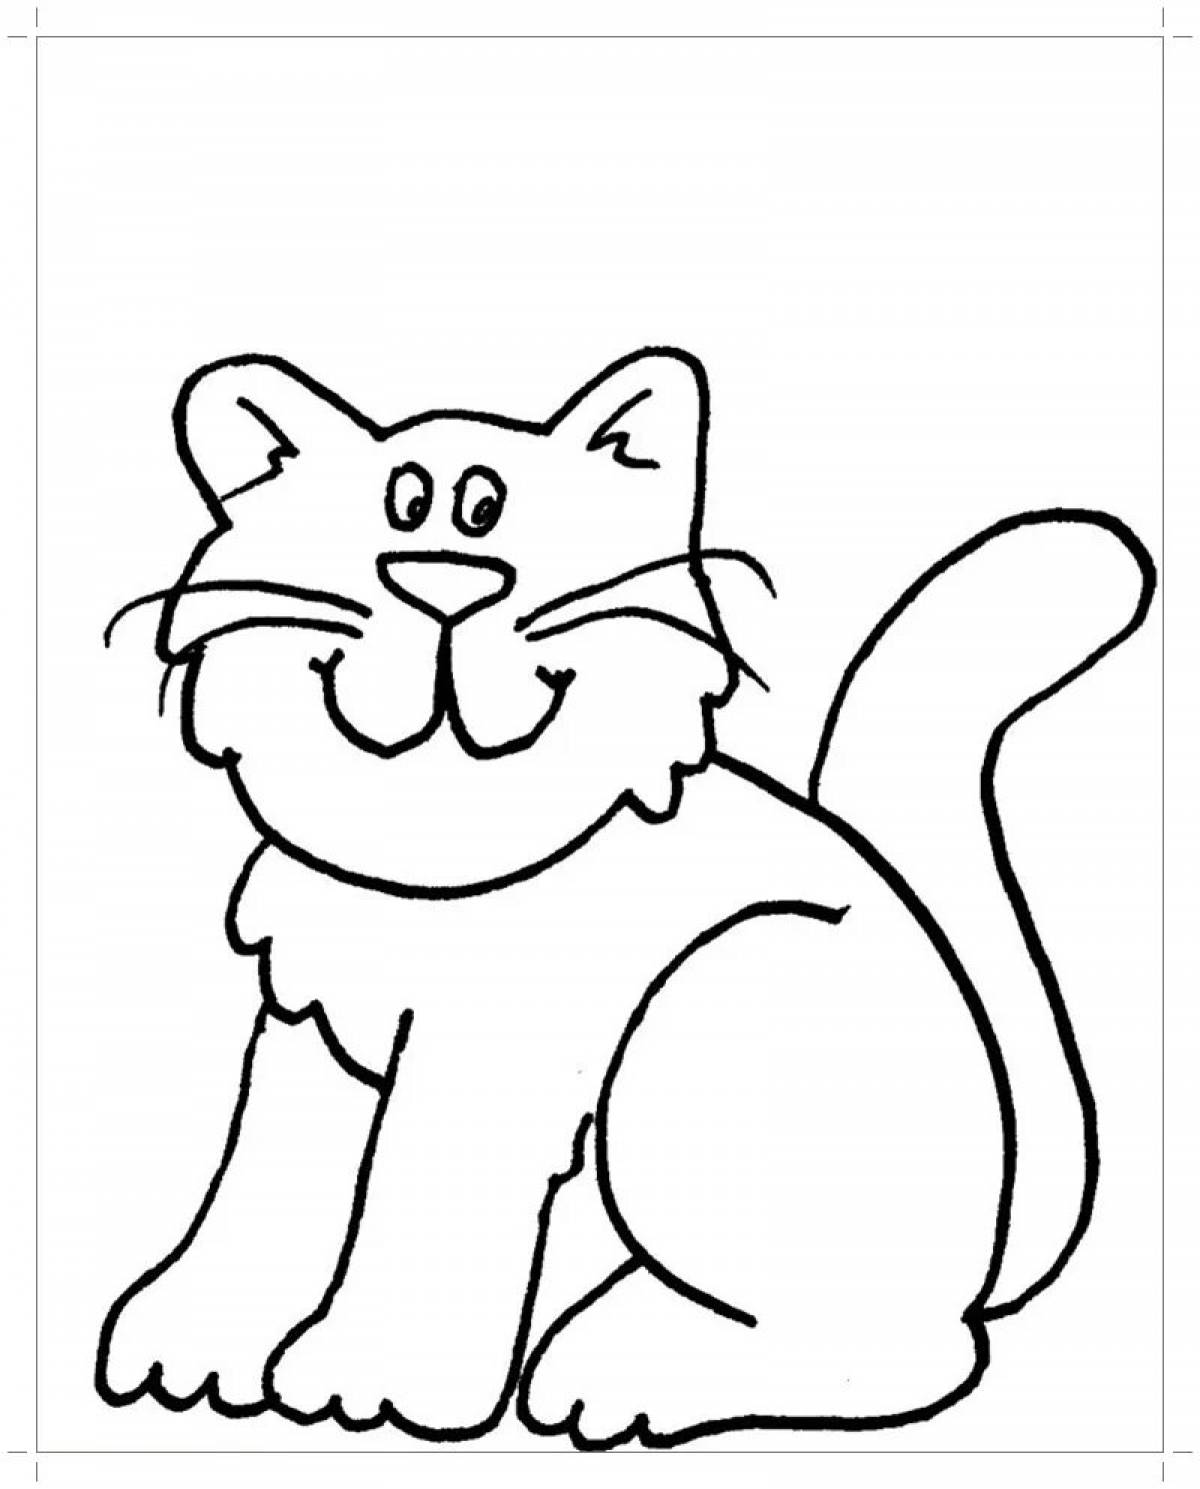 Adorable cat coloring page for kids